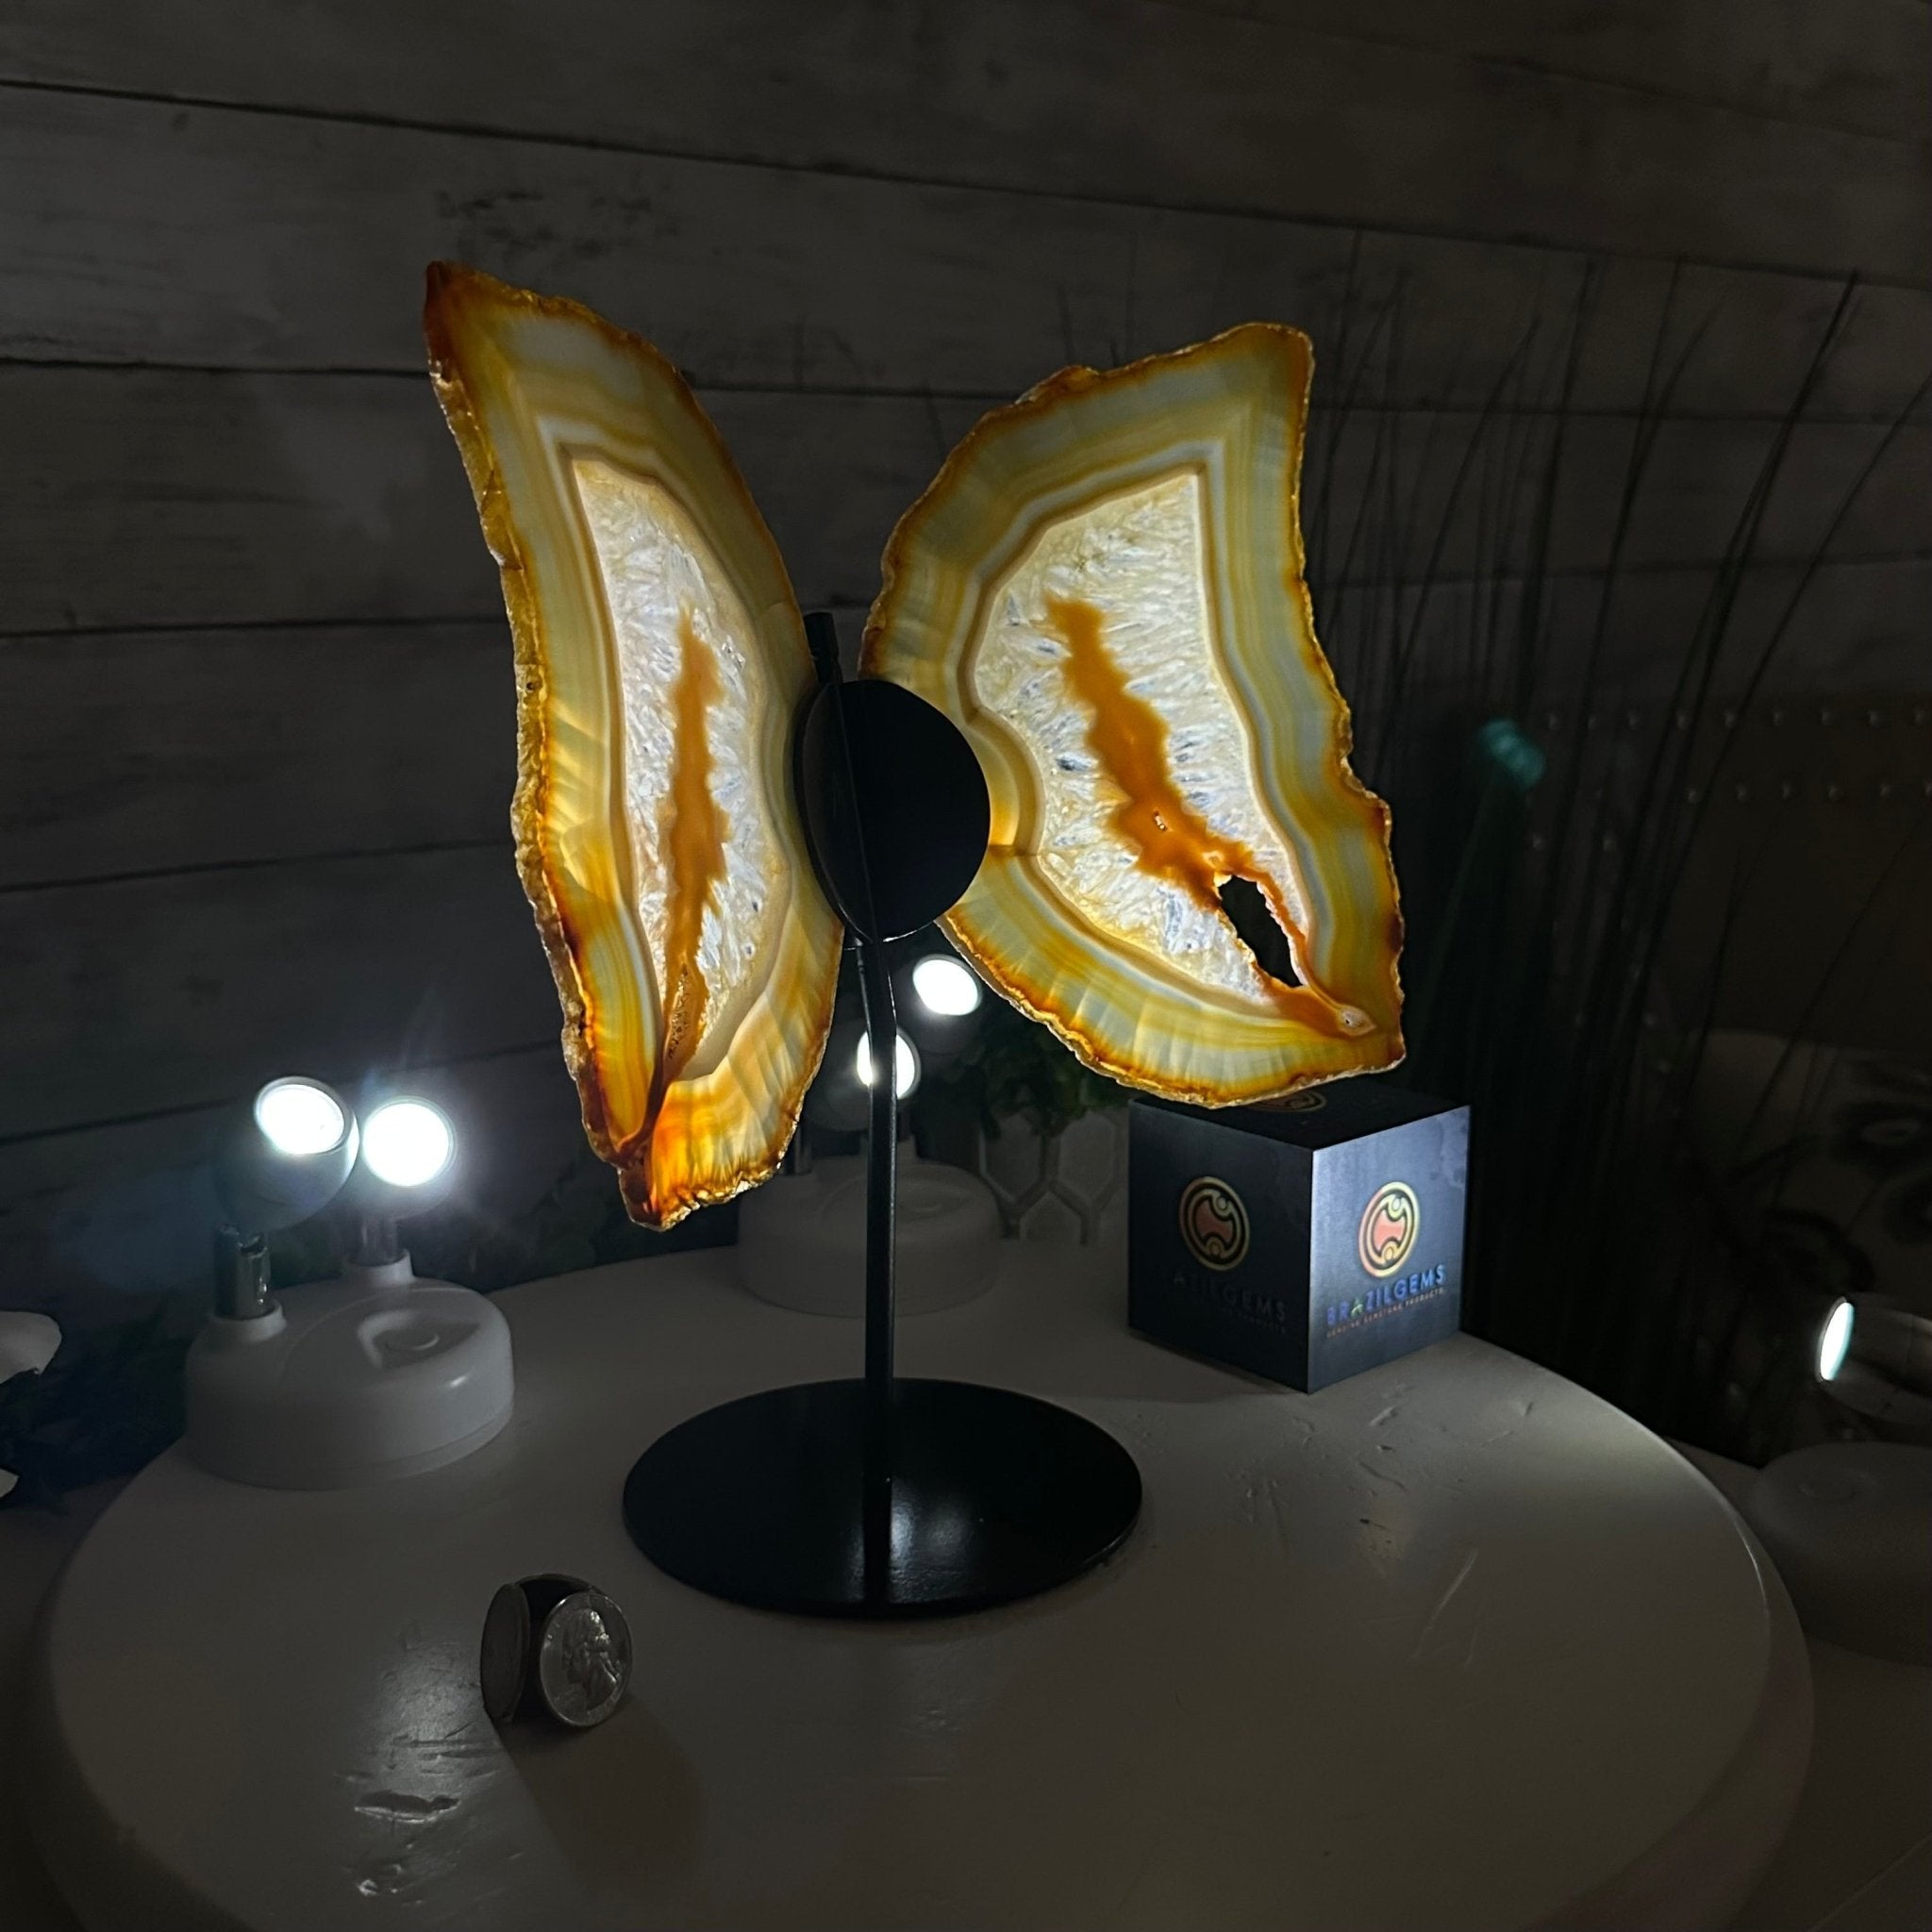 Natural Brazilian Agate "Butterfly Wings", 10.6" Tall #5050NA-122 - Brazil GemsBrazil GemsNatural Brazilian Agate "Butterfly Wings", 10.6" Tall #5050NA-122Agate Butterfly Wings5050NA-122